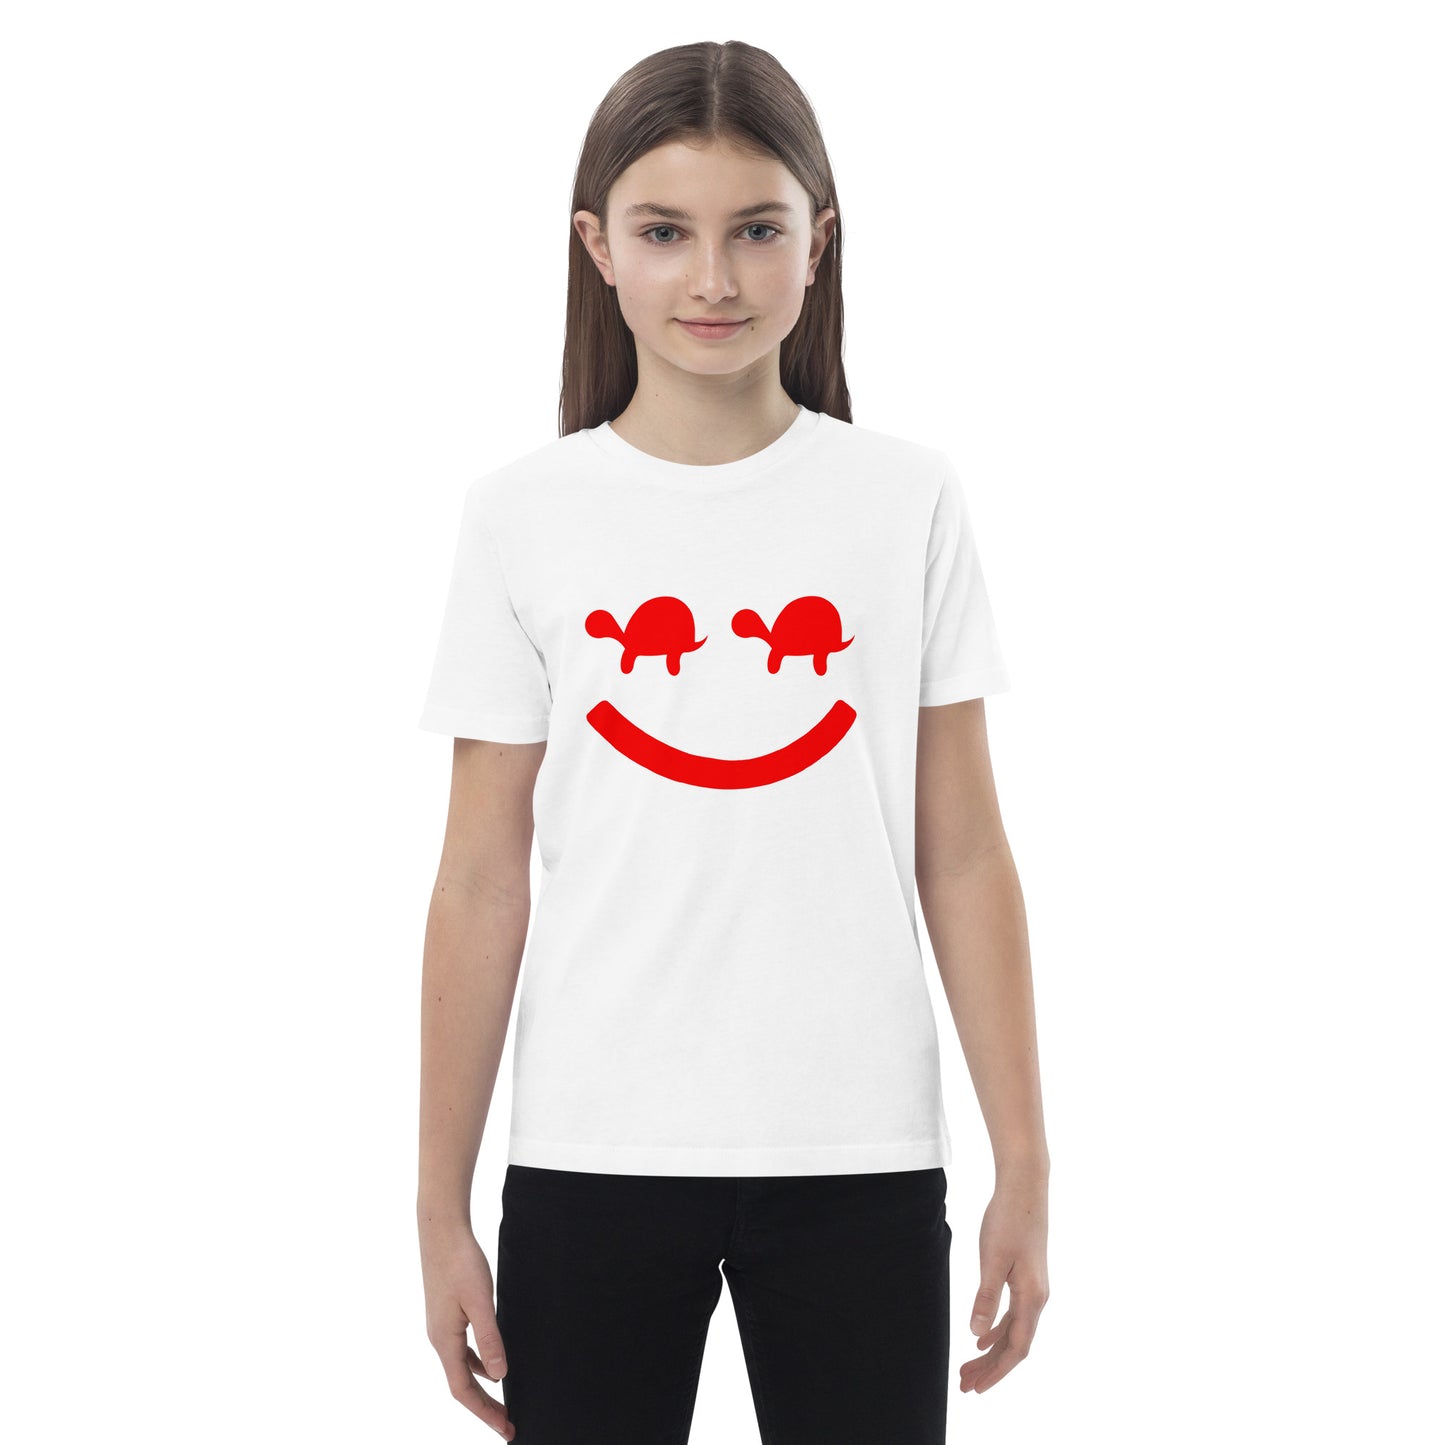 Turtle Face Kids Tee - Red/White